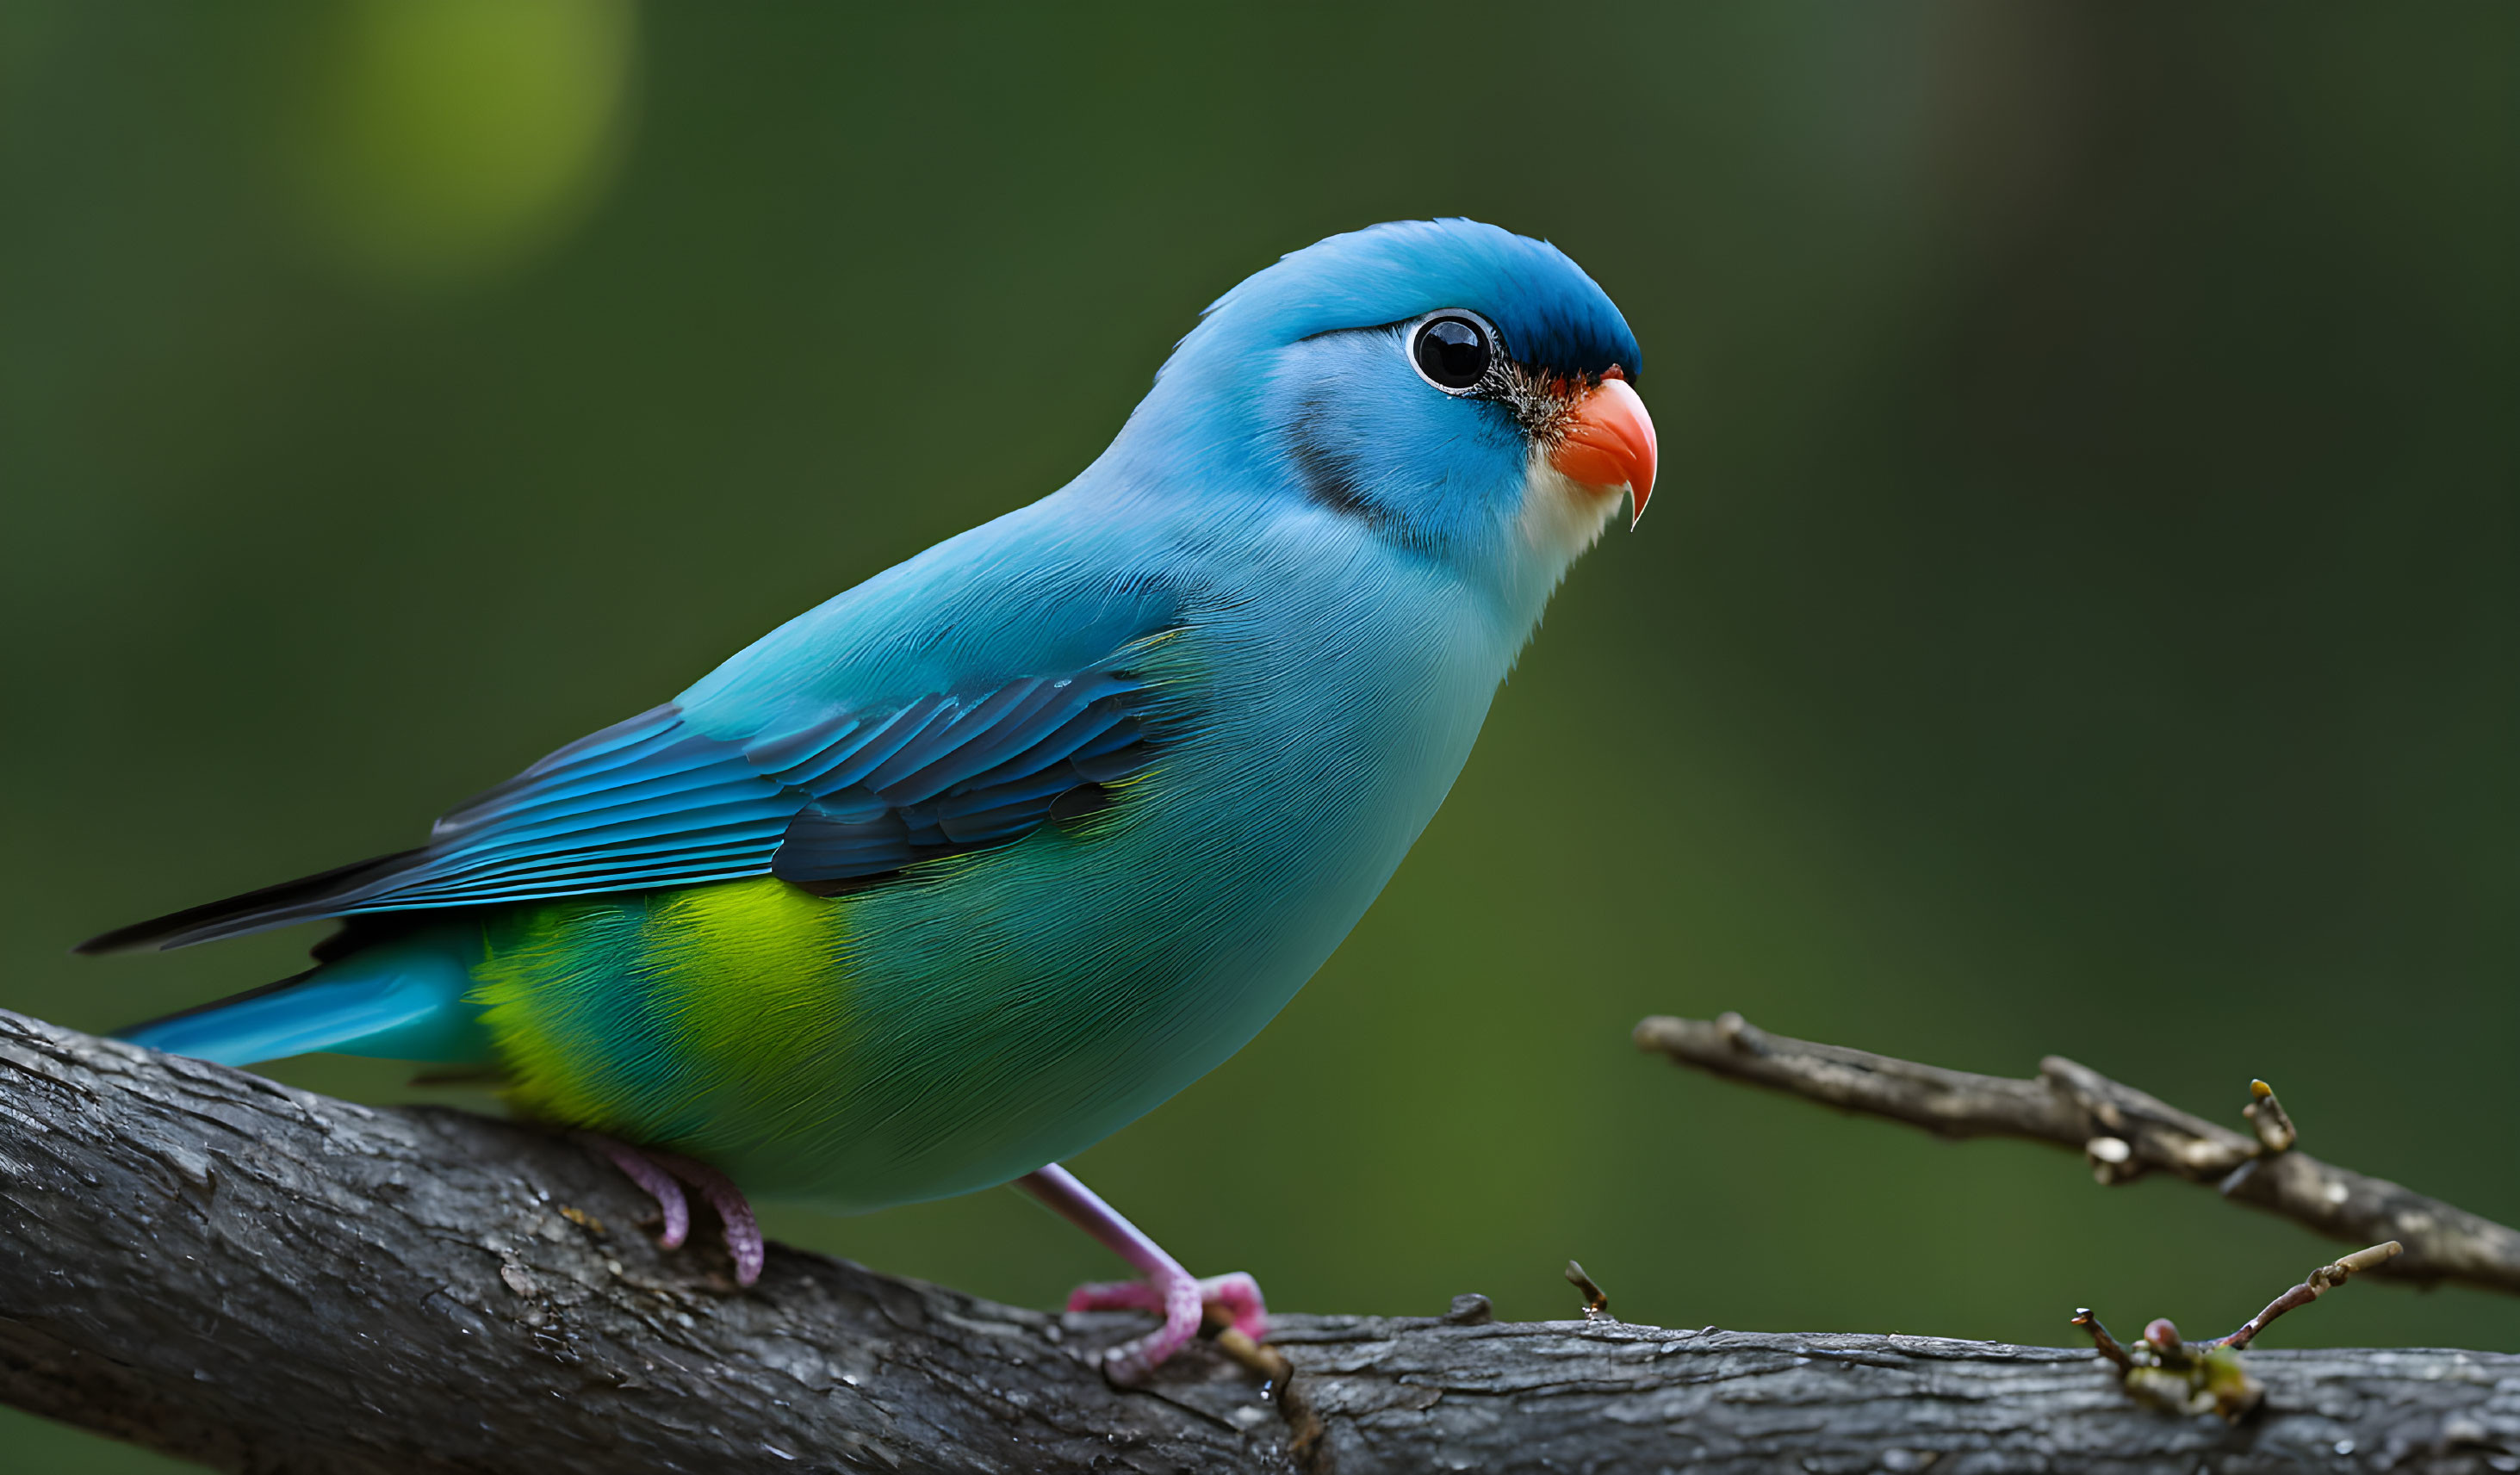 Colorful Blue Bird with Orange Beak on Branch in Green Background